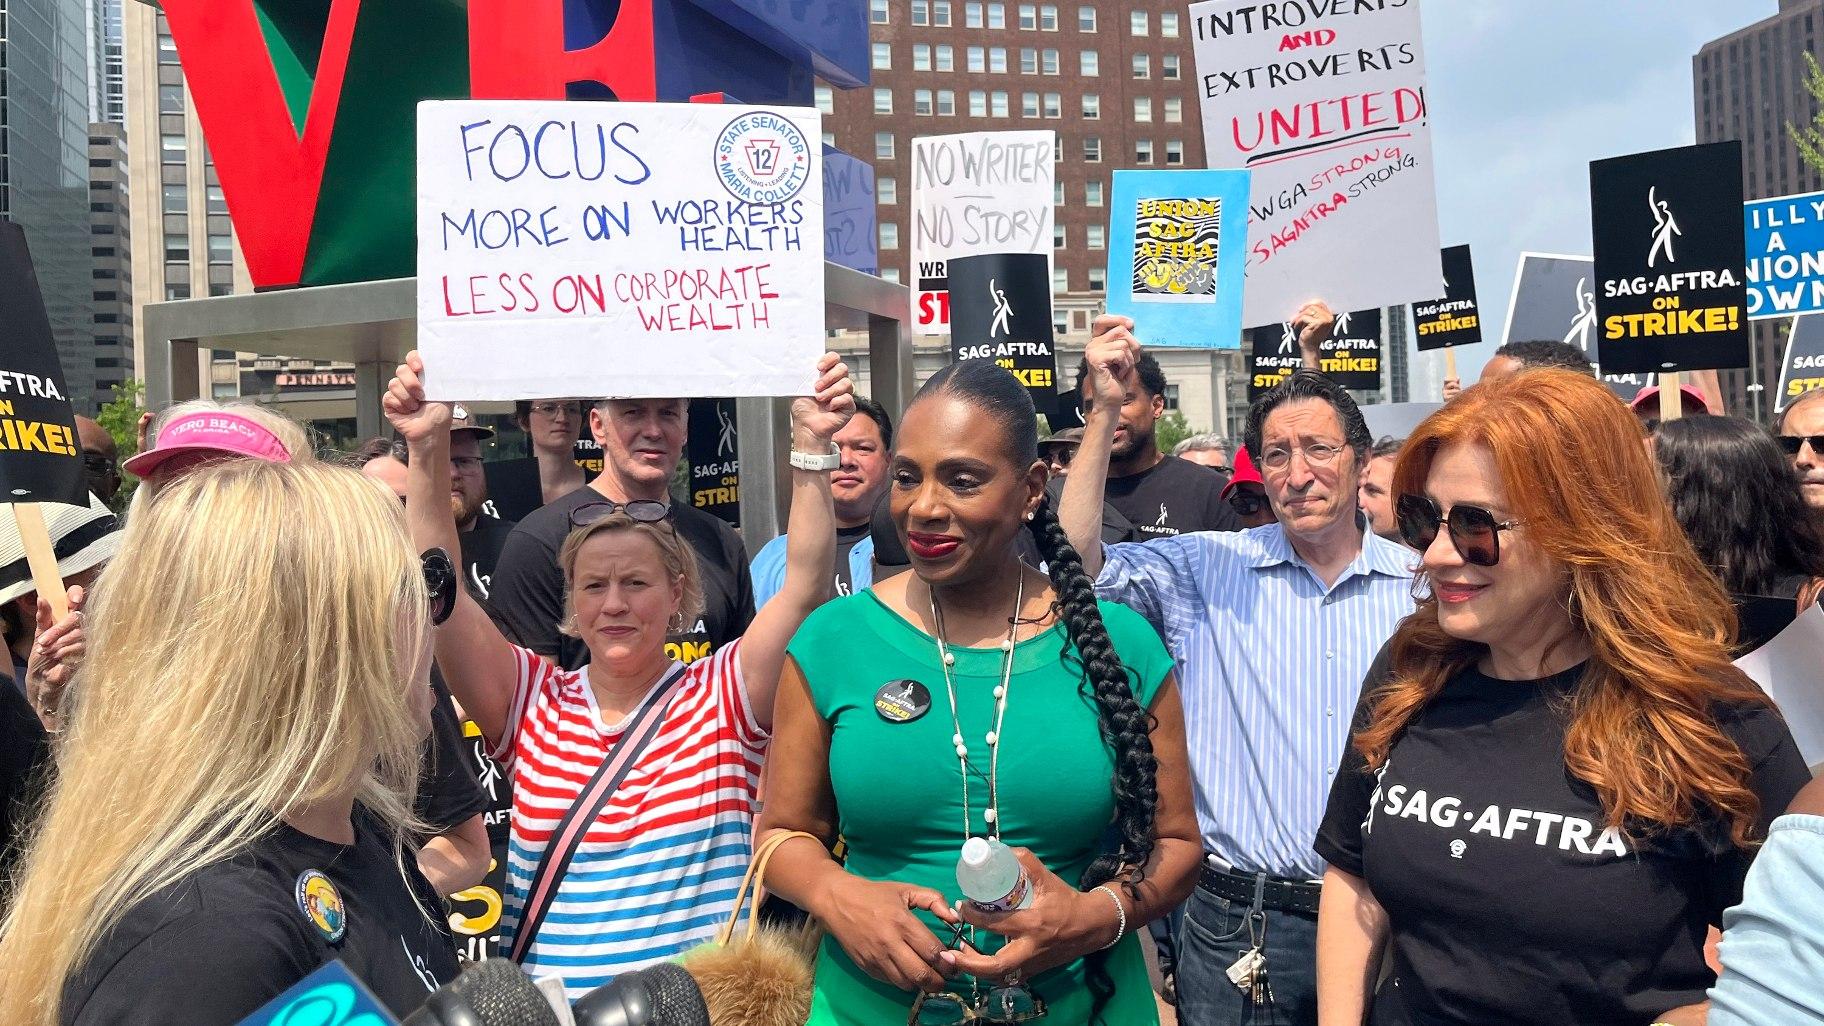 Actors Sheryl Lee Ralph, left, and Lisa Ann Walter, members of the cast of “Abbott Elementary,” participate in a rally in support of the actors and writers strikes at Love Park in Philadelphia on Thursday, July 20, 2023. (AP Photo / Tassanee Vejpongsa)